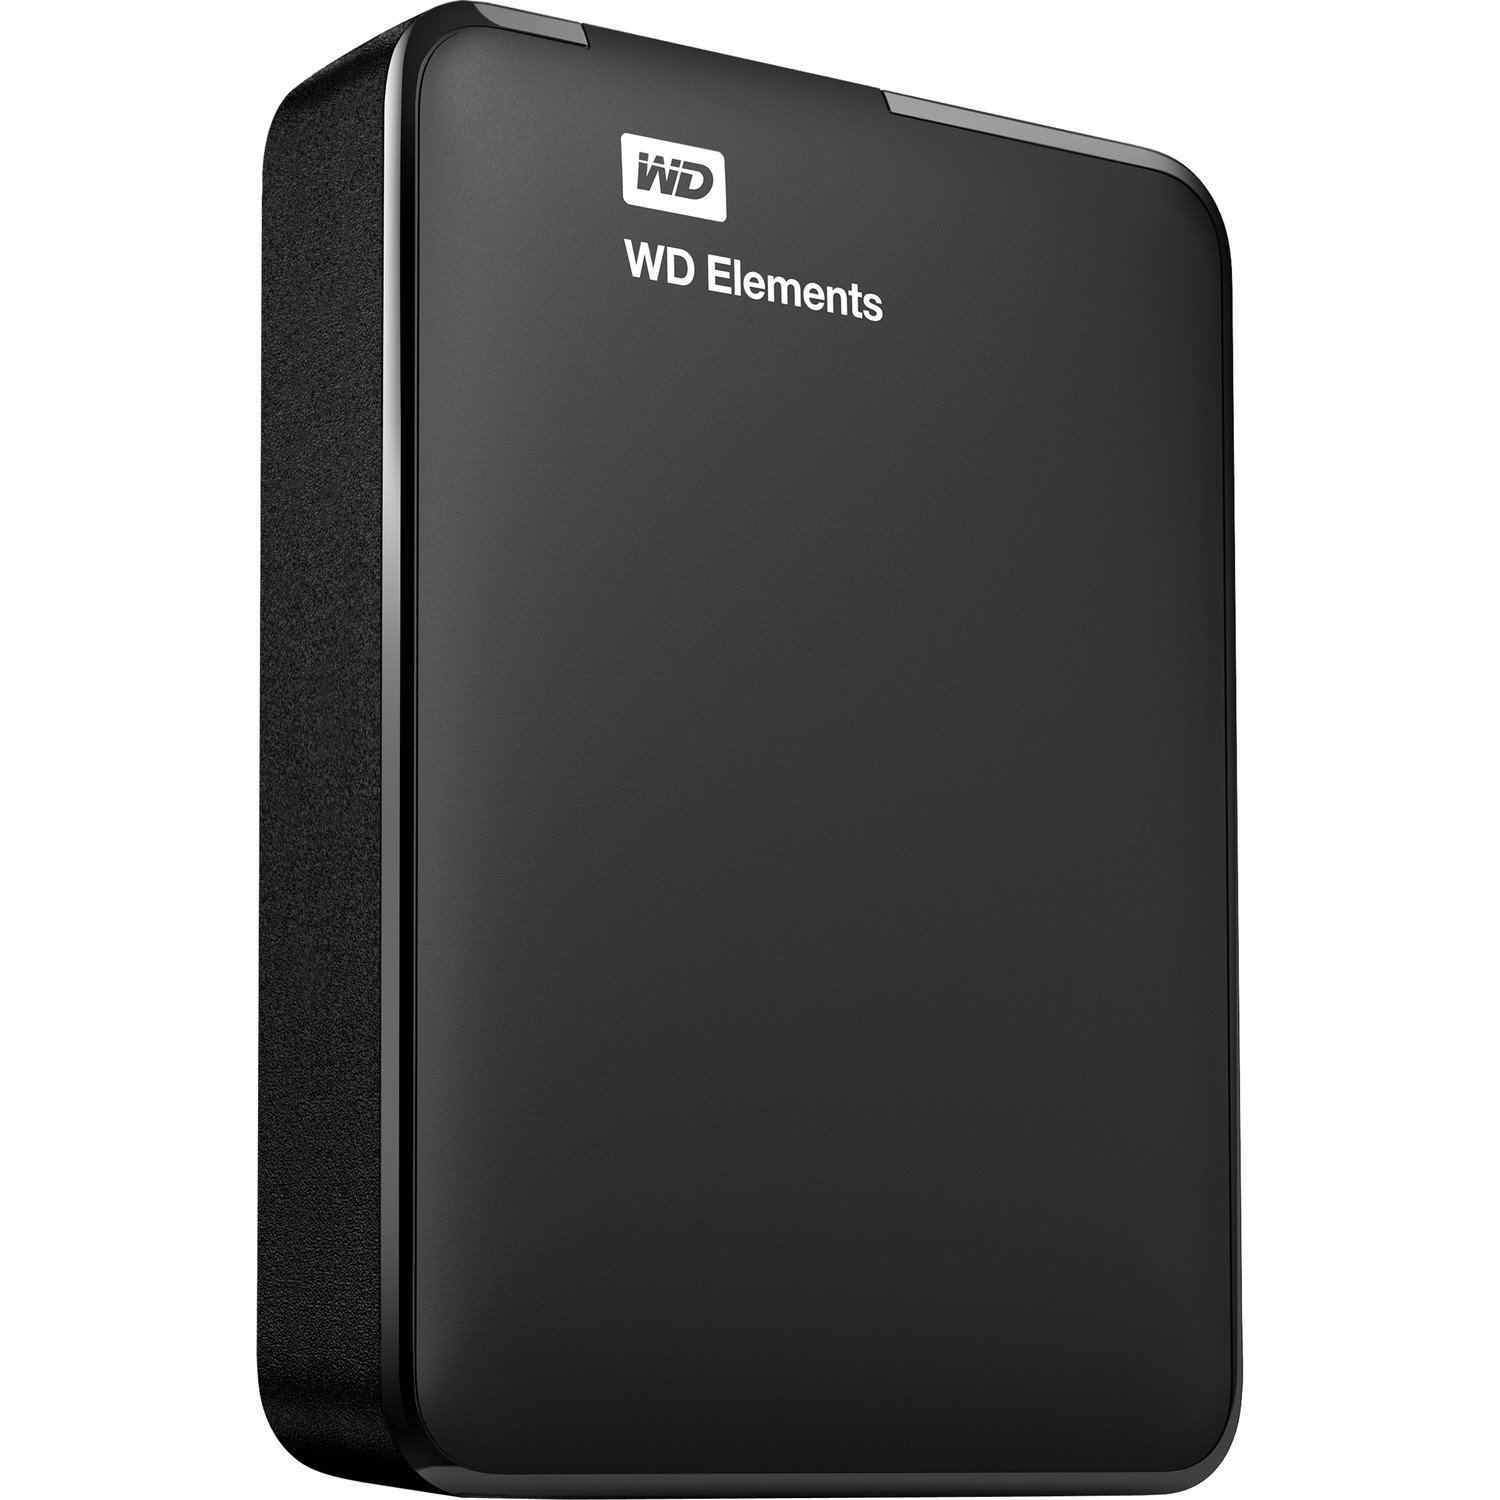 2TB WD Elements&trade; USB 3.0 high-capacity portable hard drive for Windows